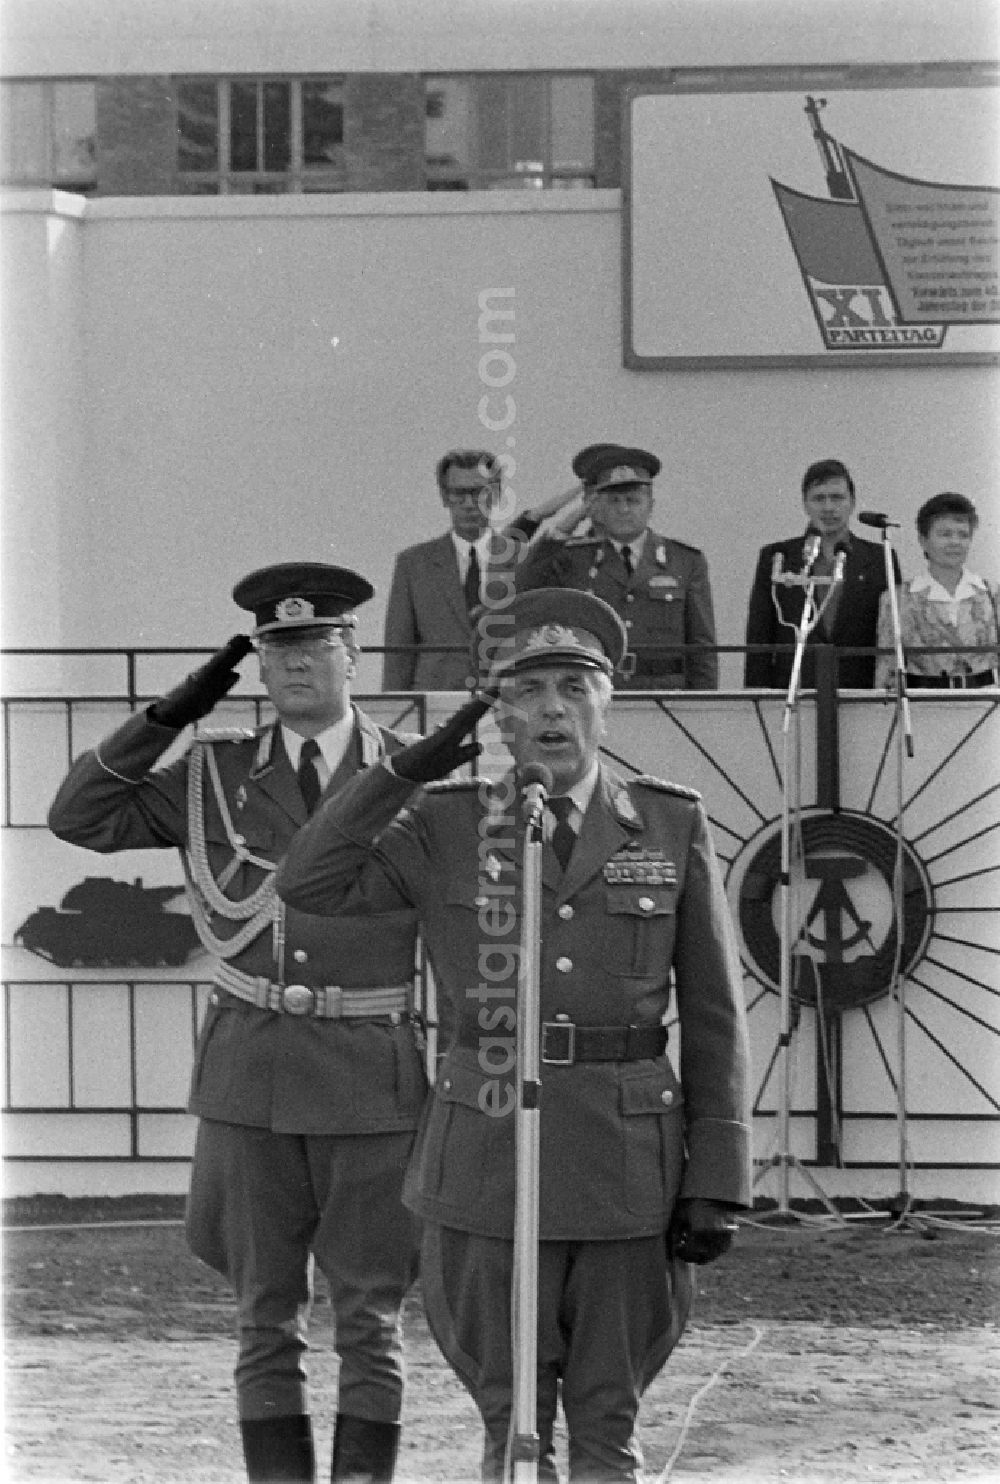 GDR image archive: Goldberg - Honorary grandstand with Major General Horst Stechbarth and soldiers and officers of Panzer Regiment 8 (PR-8) on the occasion of the ceremonial and media-effective dissolution of the troop unit on the grounds of the Artur-Becker barracks in Goldberg in the state of Mecklenburg-Western Pomerania in the area of the former GDR, German Democratic Republic